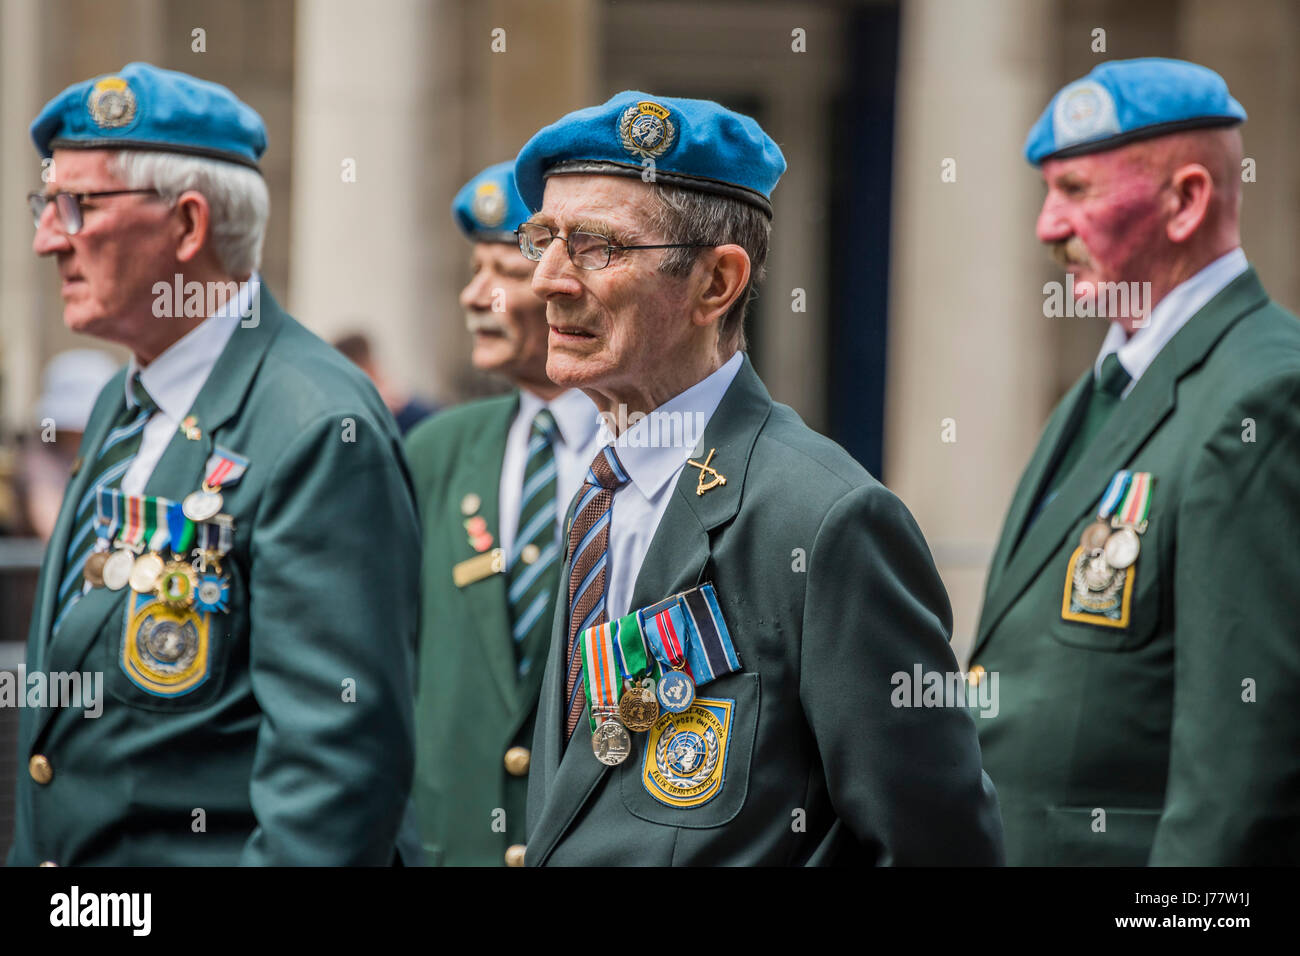 London, UK. 24th May, 2017. Blue berets worn with pride by old soldiers - A  remembrance march in honour of the International Day of United Nations  Peacekeepers. London 24 May 2017. Credit: